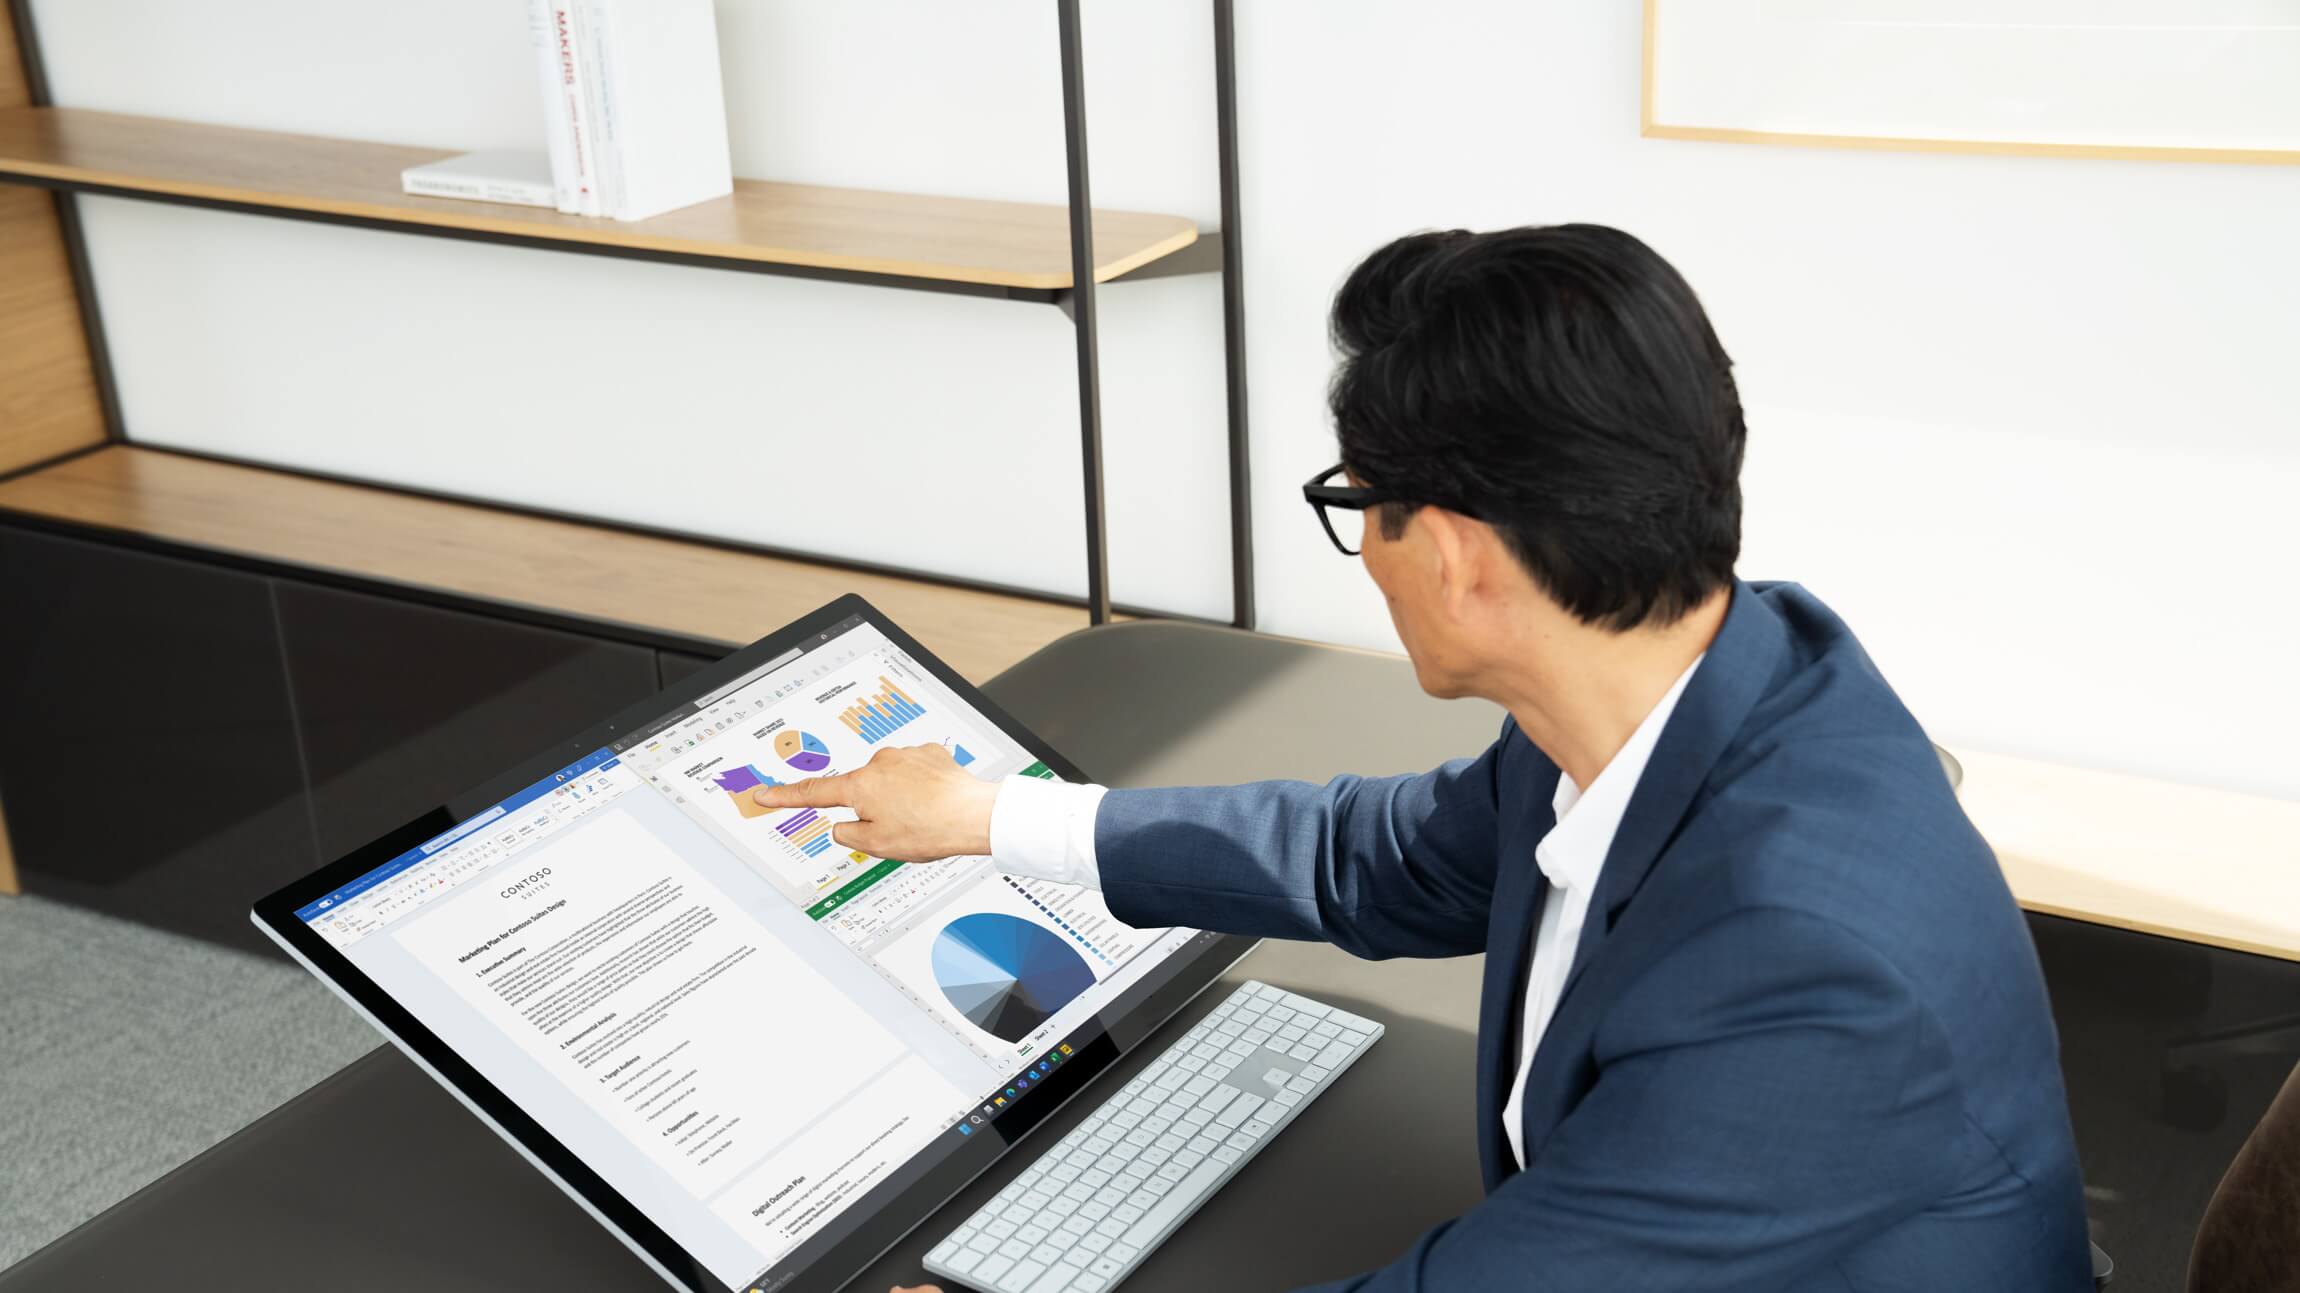 A professional in an office setting surveys an analytics dashboard on a Microsoft Surface Studio.